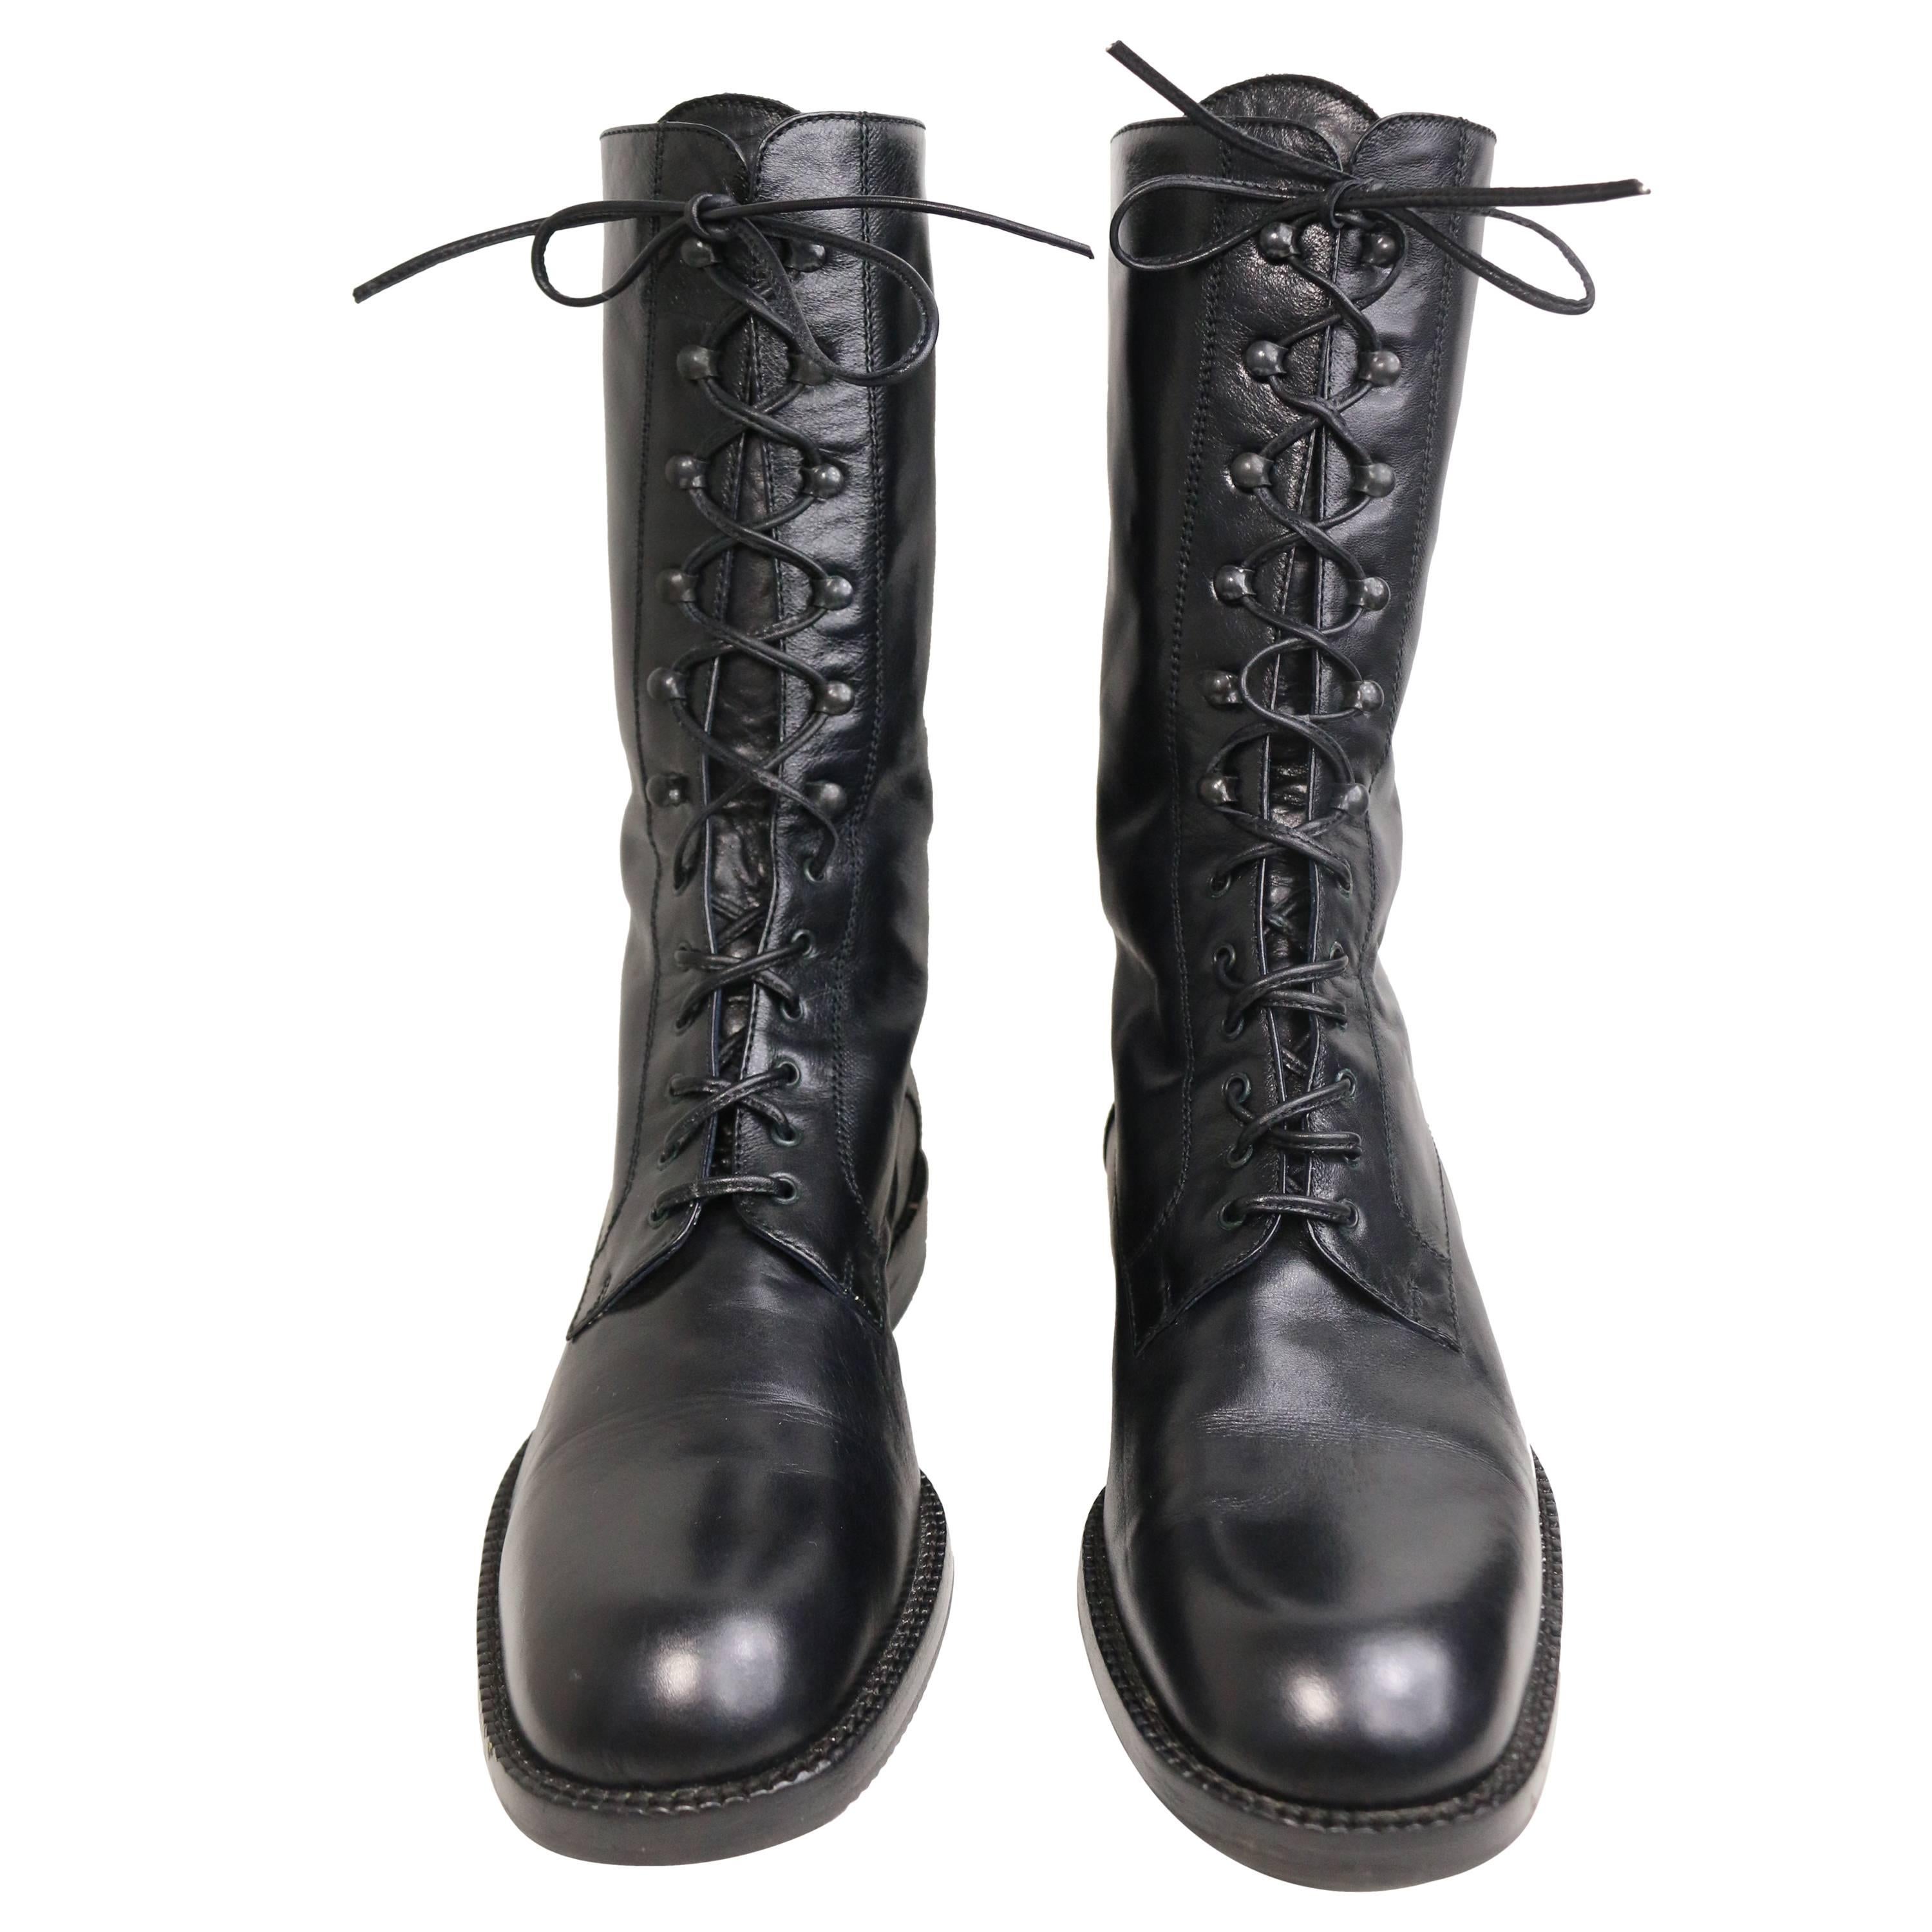 Vintage 90s Black Leather Military Style Army Combat Lace Up Ankle Worker Boots 